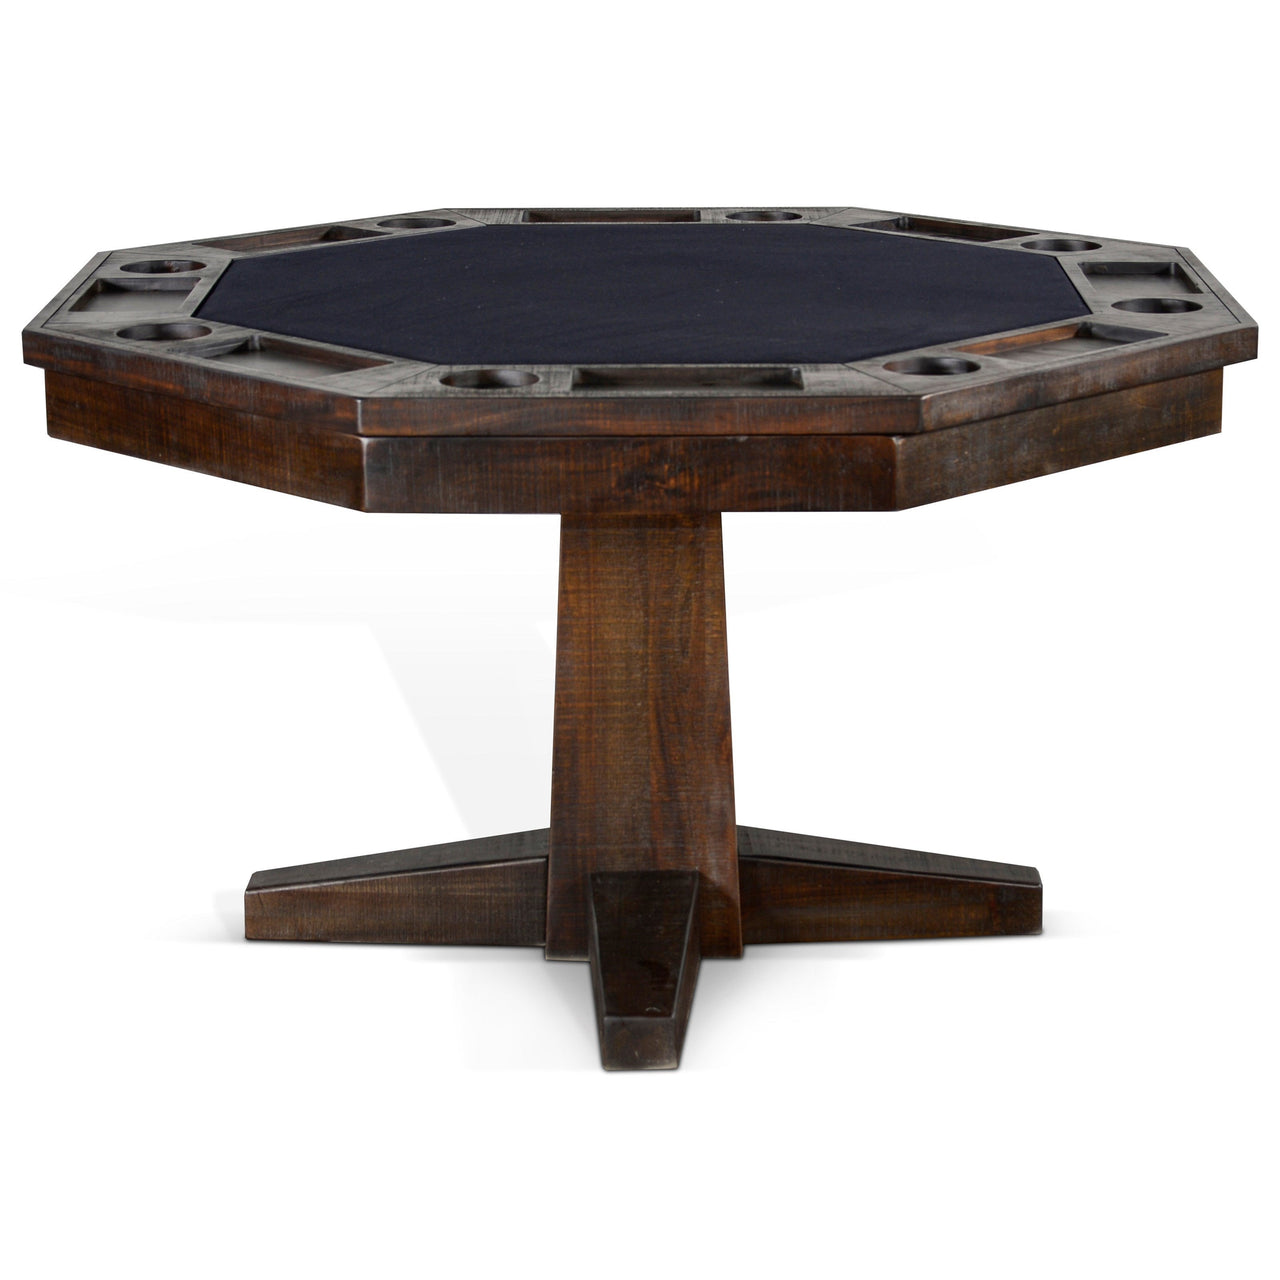 Convertible Poker & Dining Table Dark Tobacco Leaf by Sunny Designs-AMERICANA-POKER-TABLES